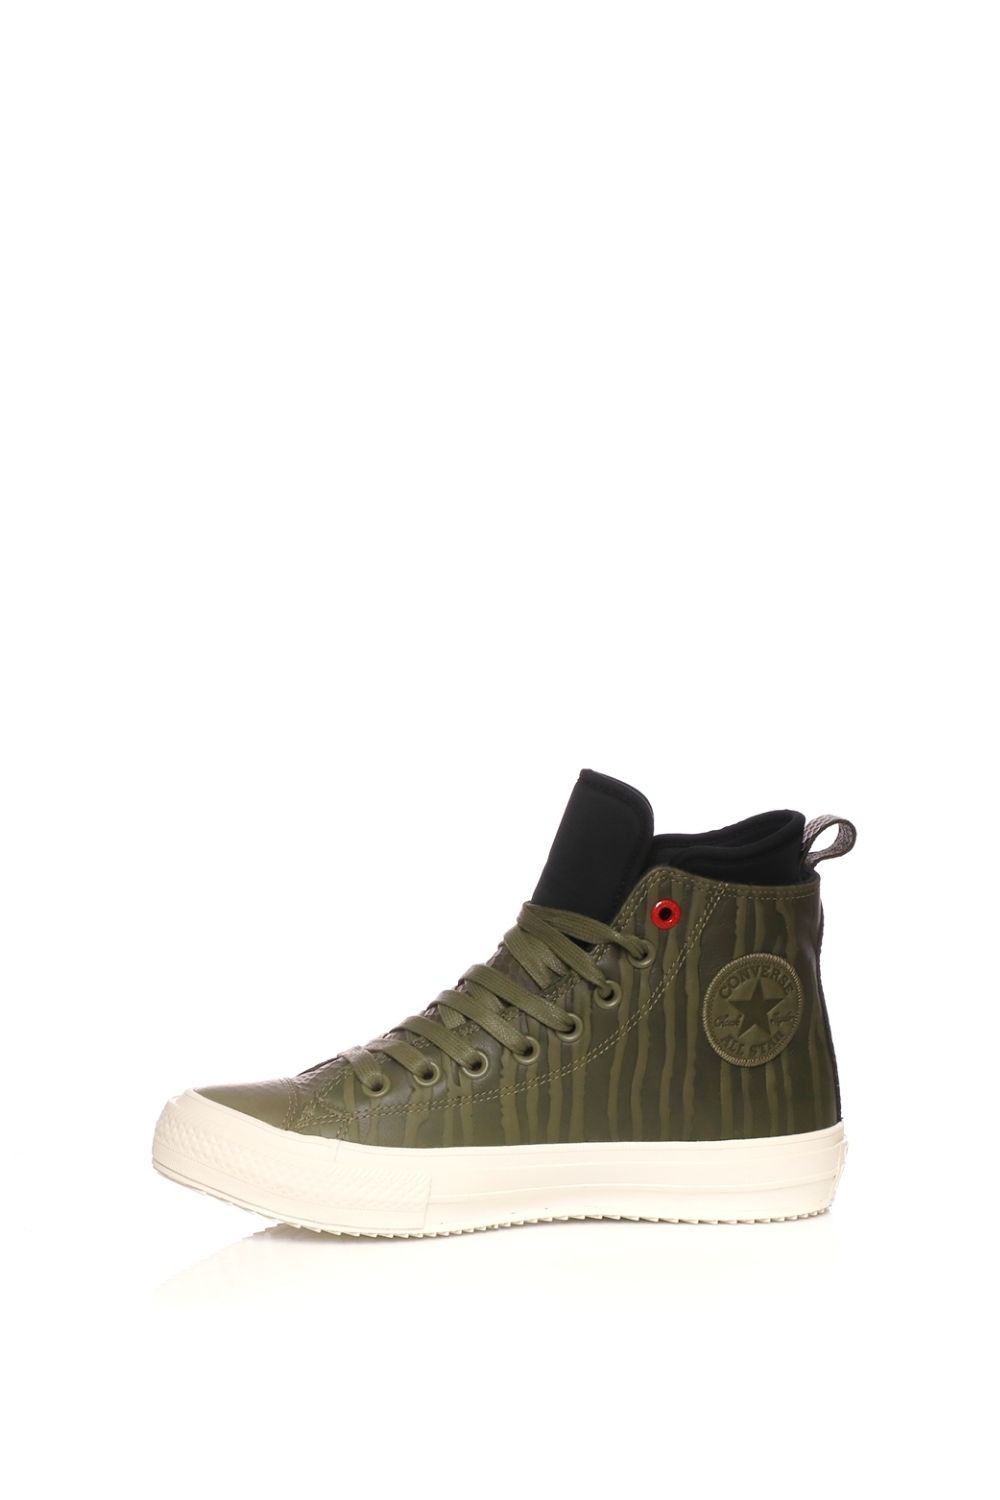 CONVERSE - Ανδρικά ψηλά sneakers CONVERSE Chuck Taylor AS WP Boot Hi χακί